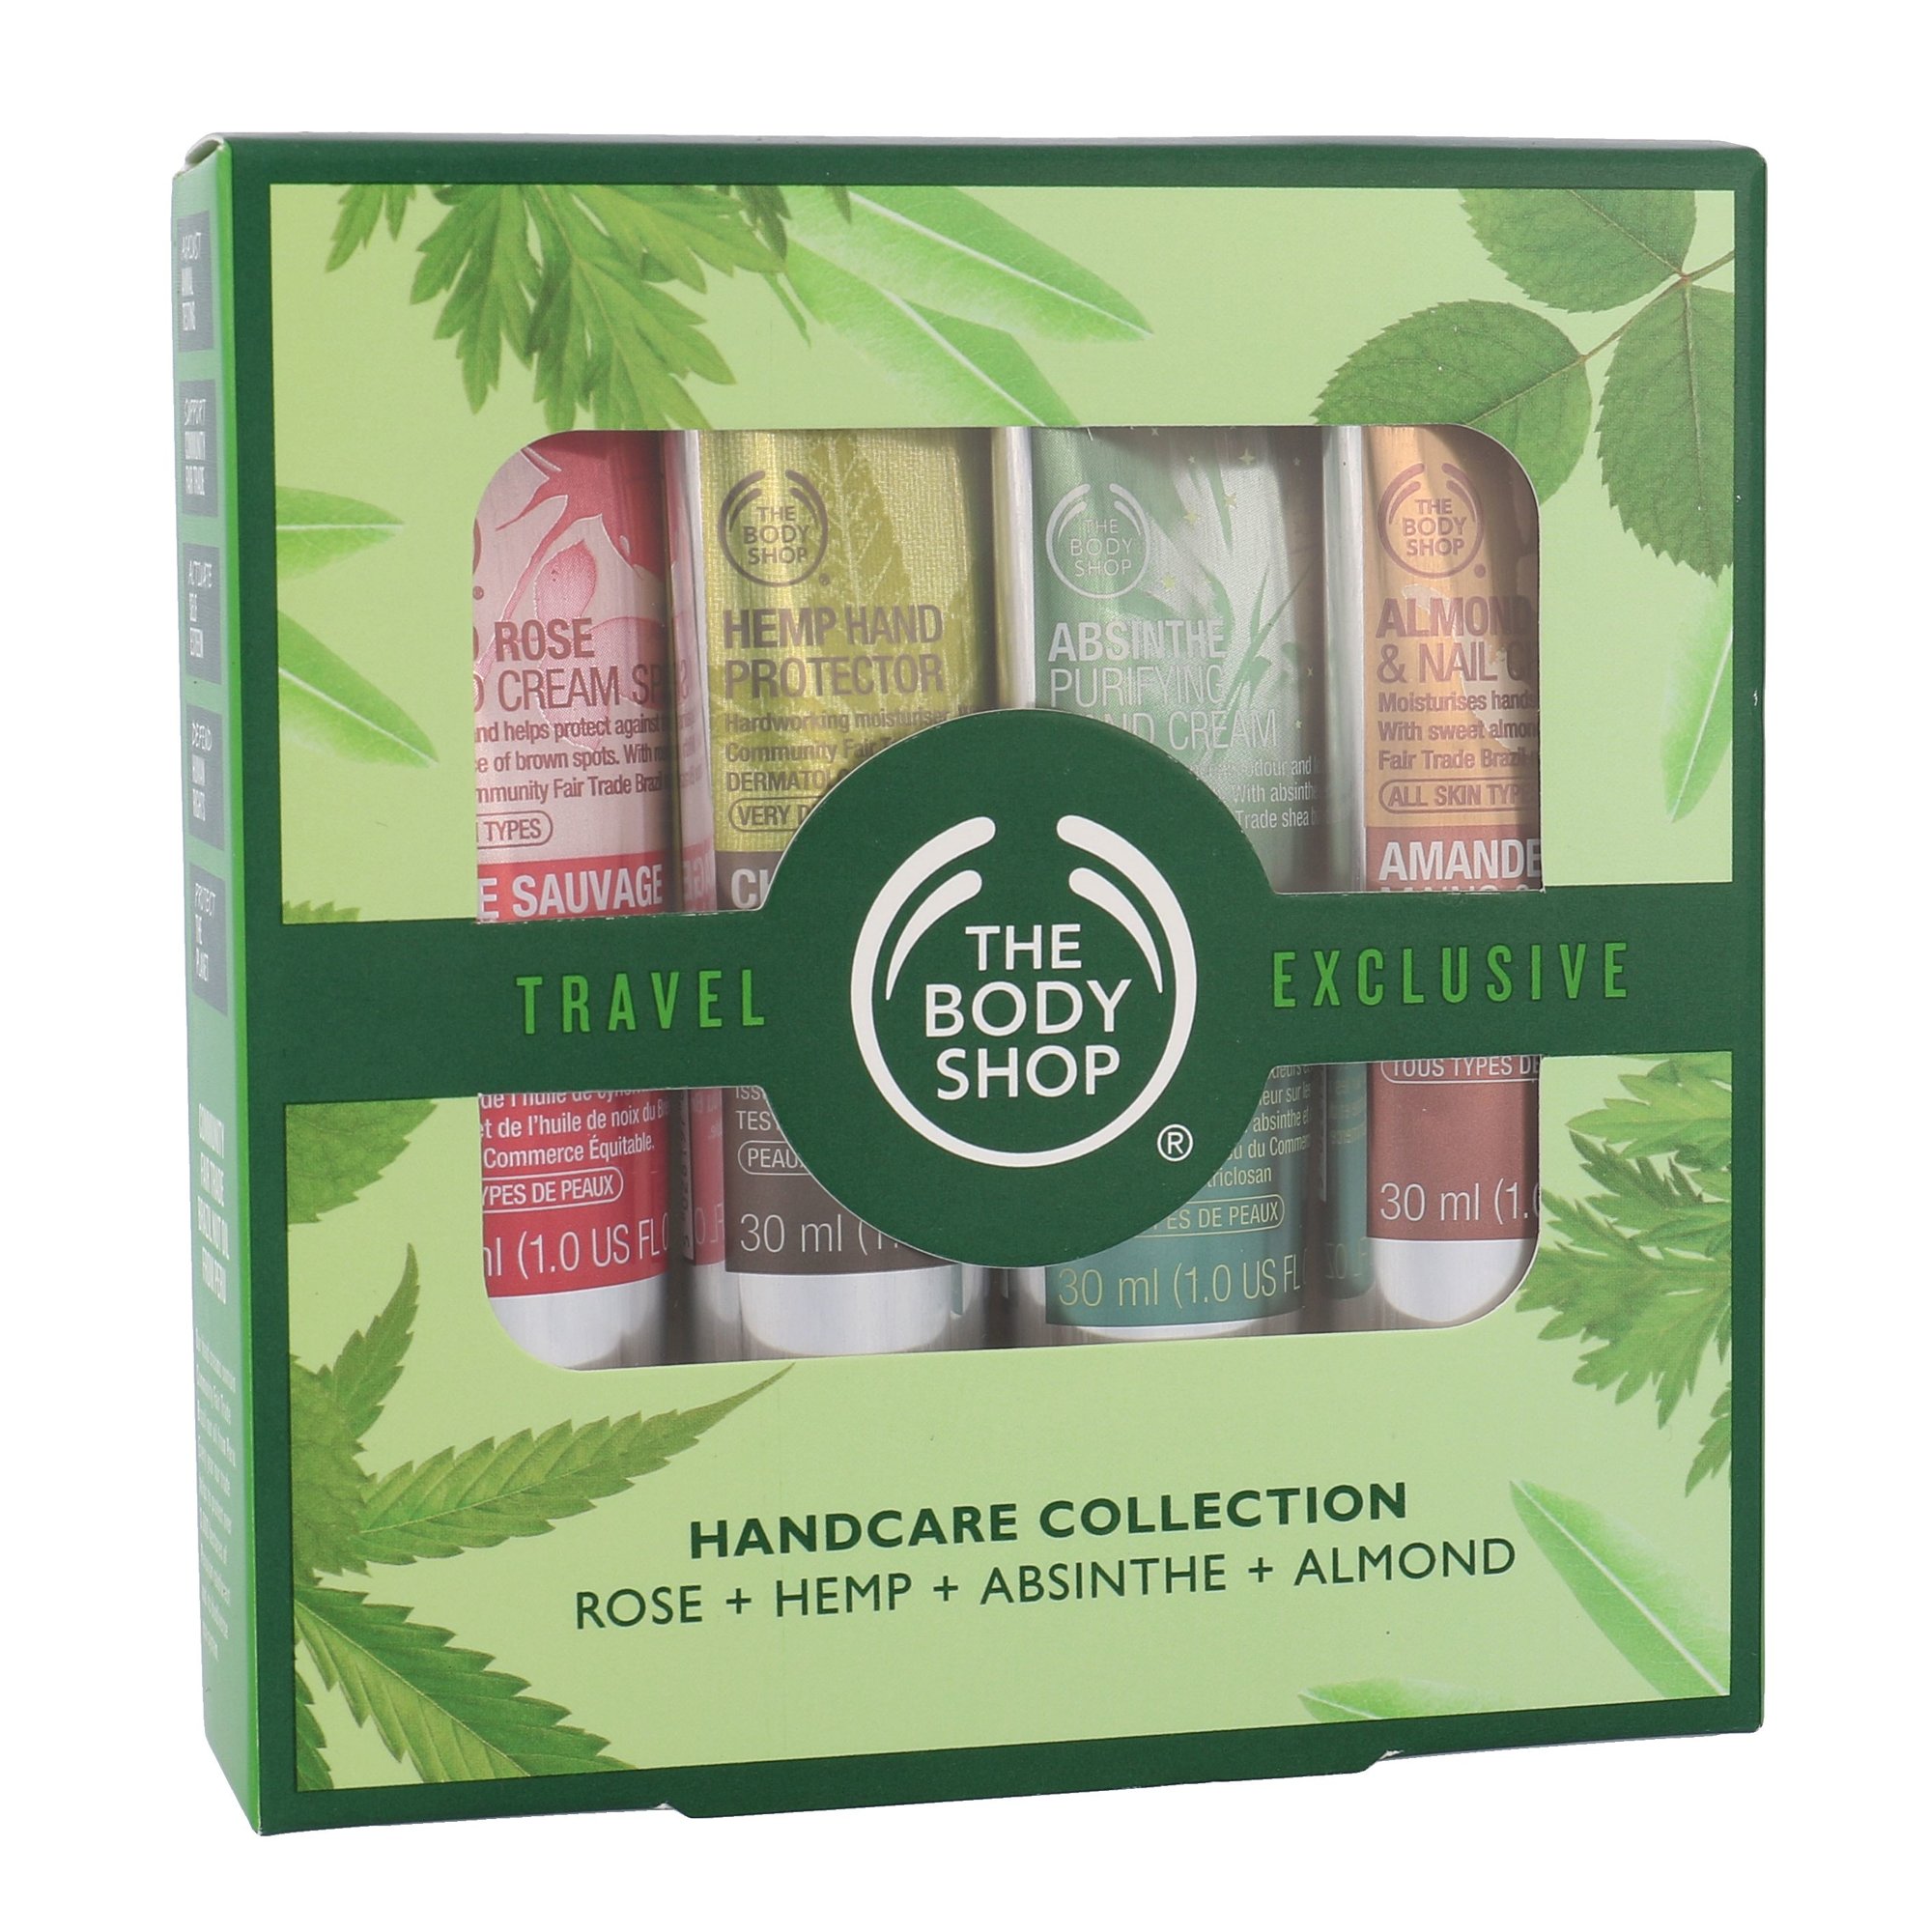 The Body Shop Handcare Collection